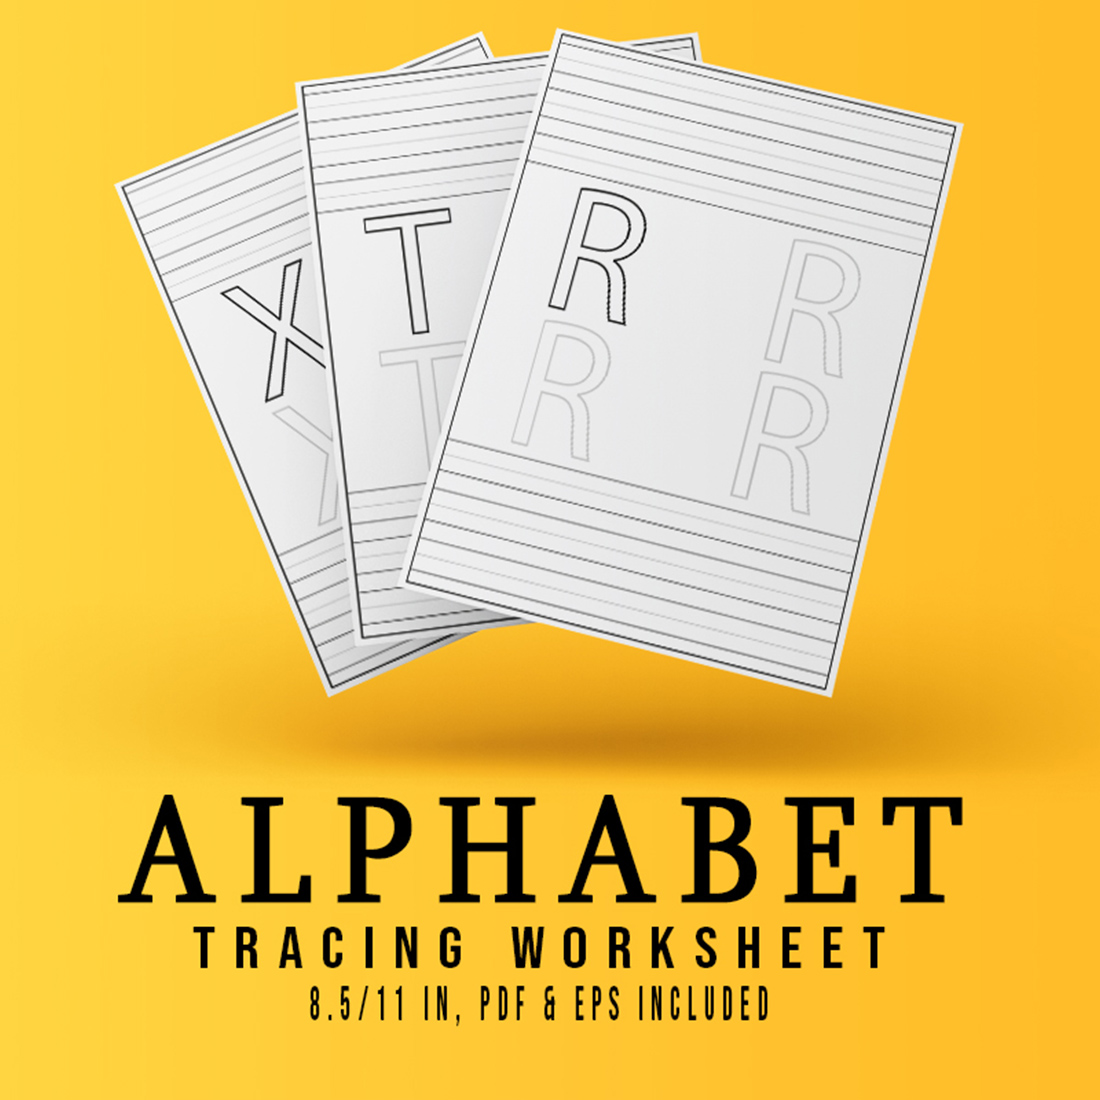 Alphabets A to Z Words Tracing Worksheets Bundle cover image.